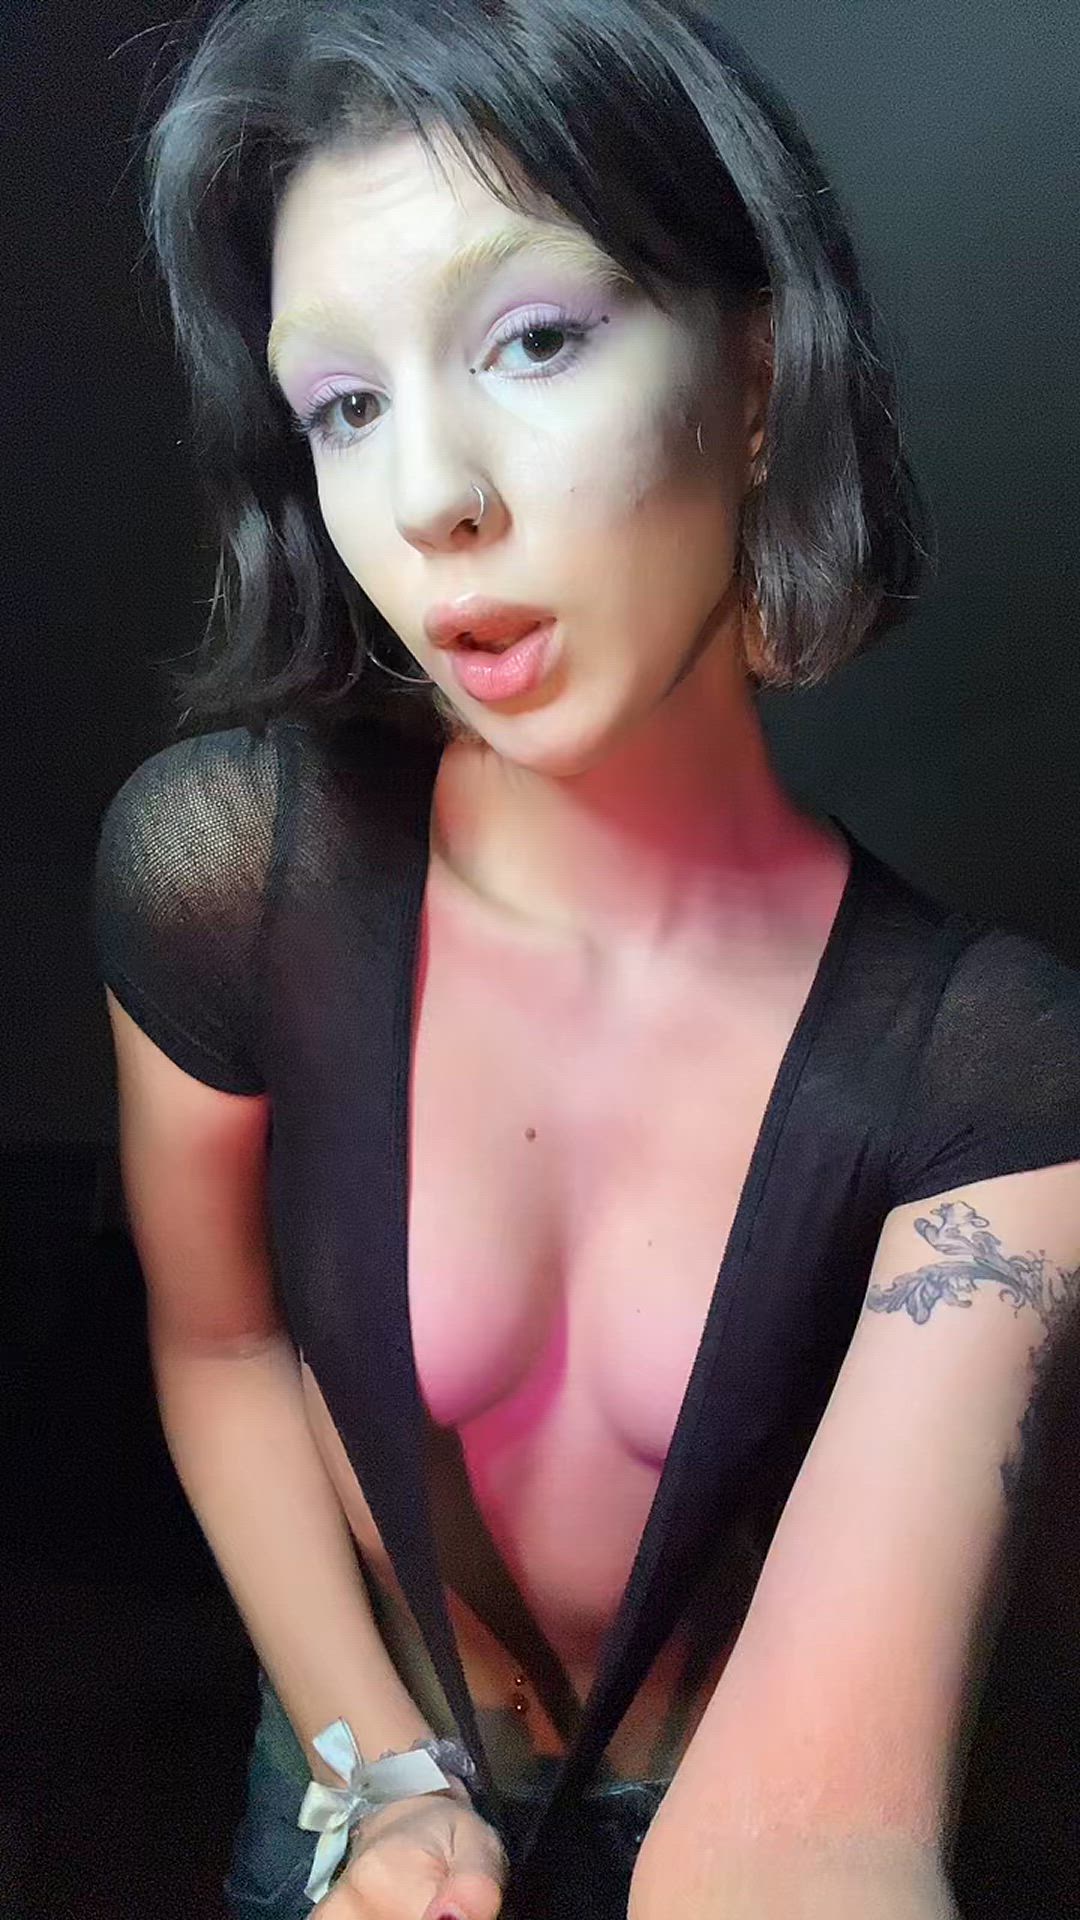 Tits porn video with onlyfans model velvetyx <strong>@velvety_vip</strong>